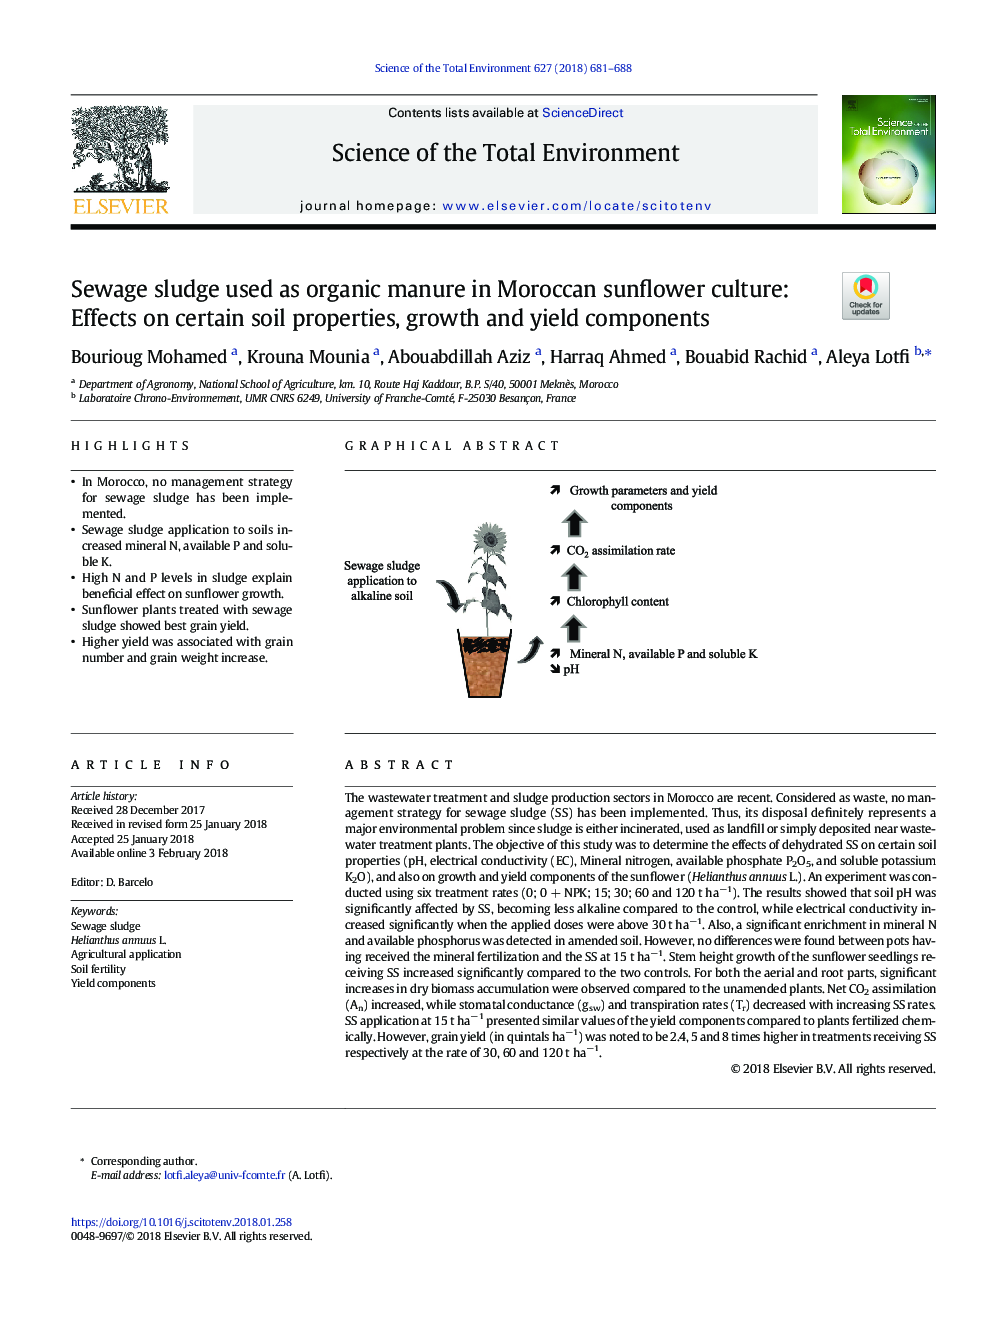 Sewage sludge used as organic manure in Moroccan sunflower culture: Effects on certain soil properties, growth and yield components